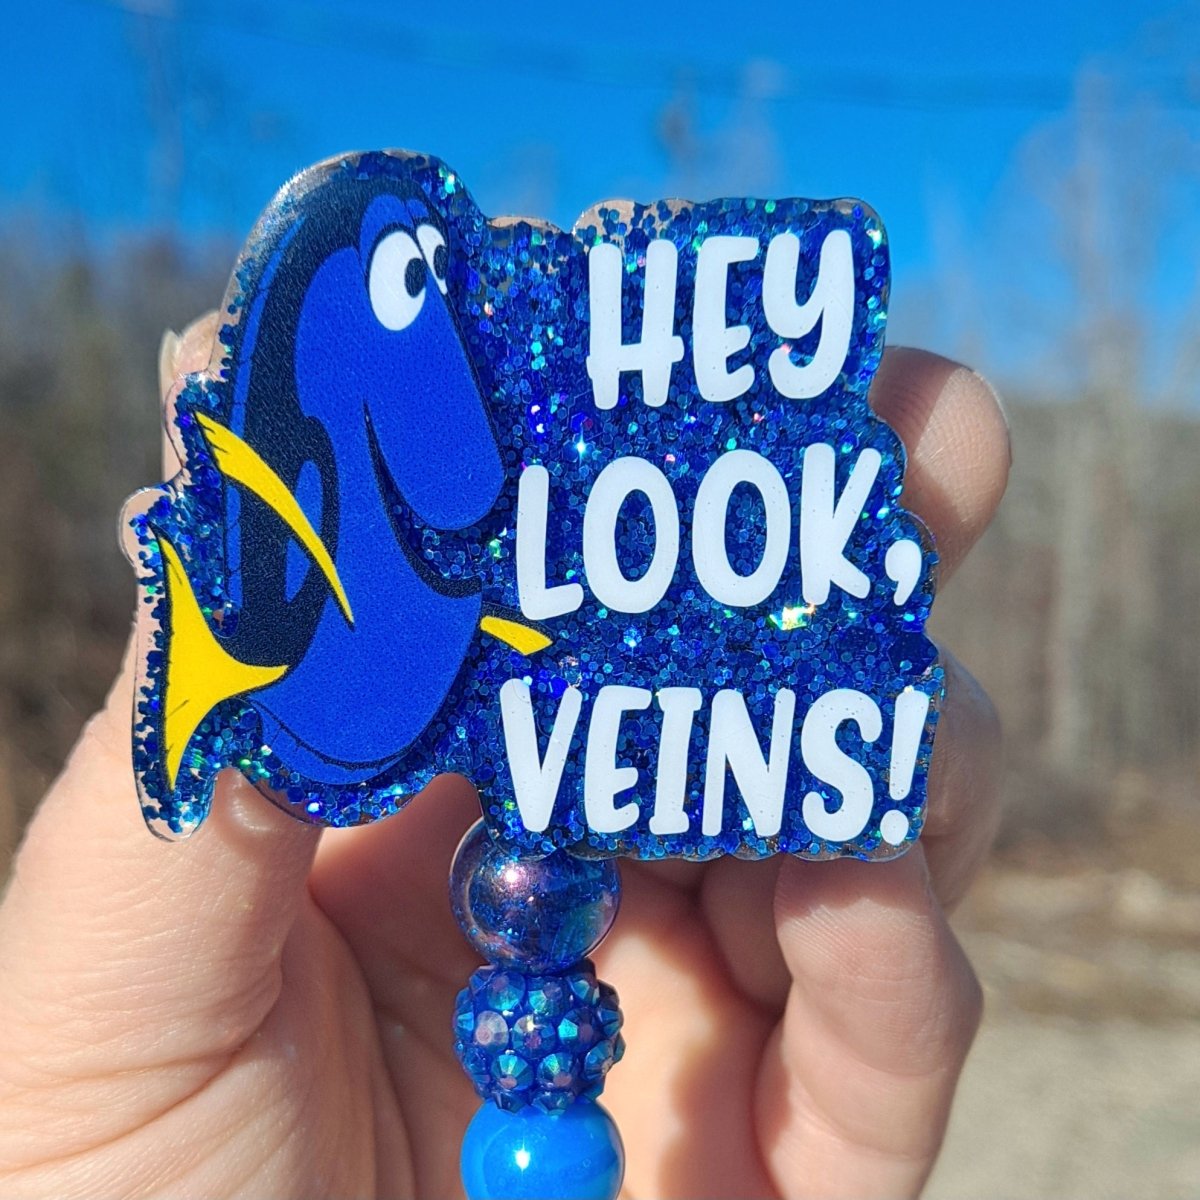 Dory Hey Look Veins Badge Reel - The Badge Boutique Co